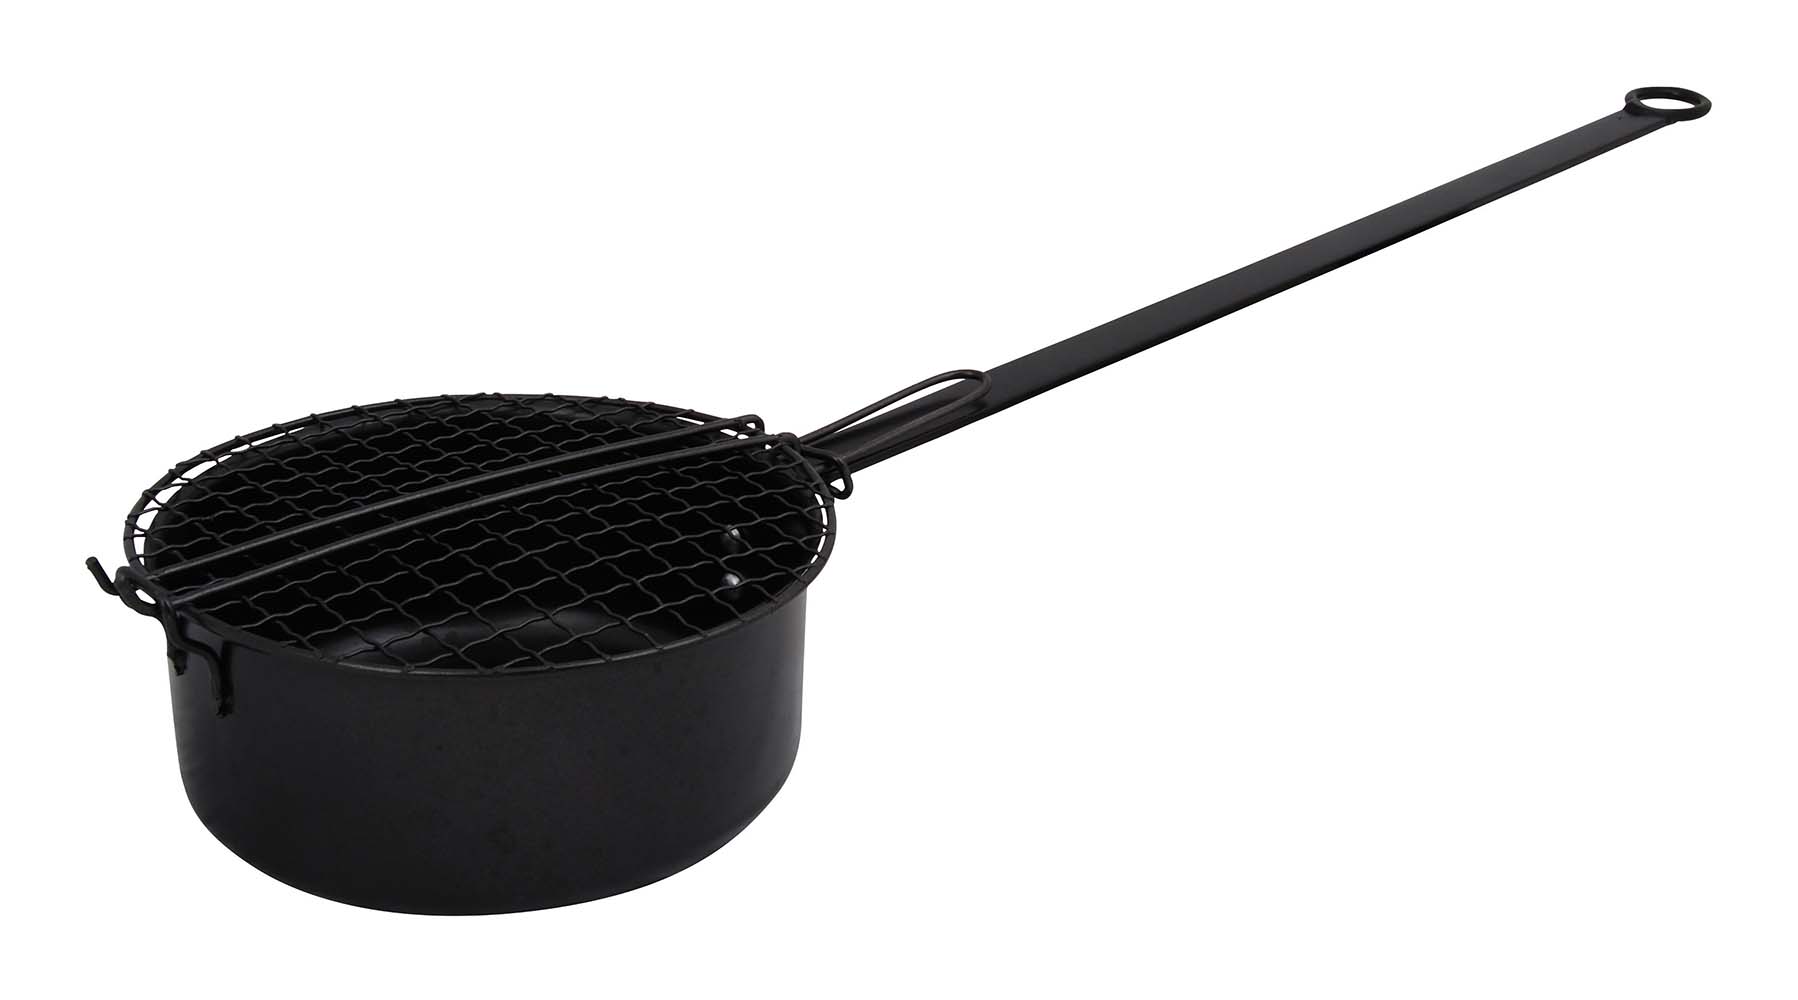 2305100 A popcorn pan especially for outdoor use. With an extra long handle so that the pan can be used over an open fire at a safe distance from the flames. Made of steel especially for outdoor use. Easy to hang using the eyelet at the end of the handle.